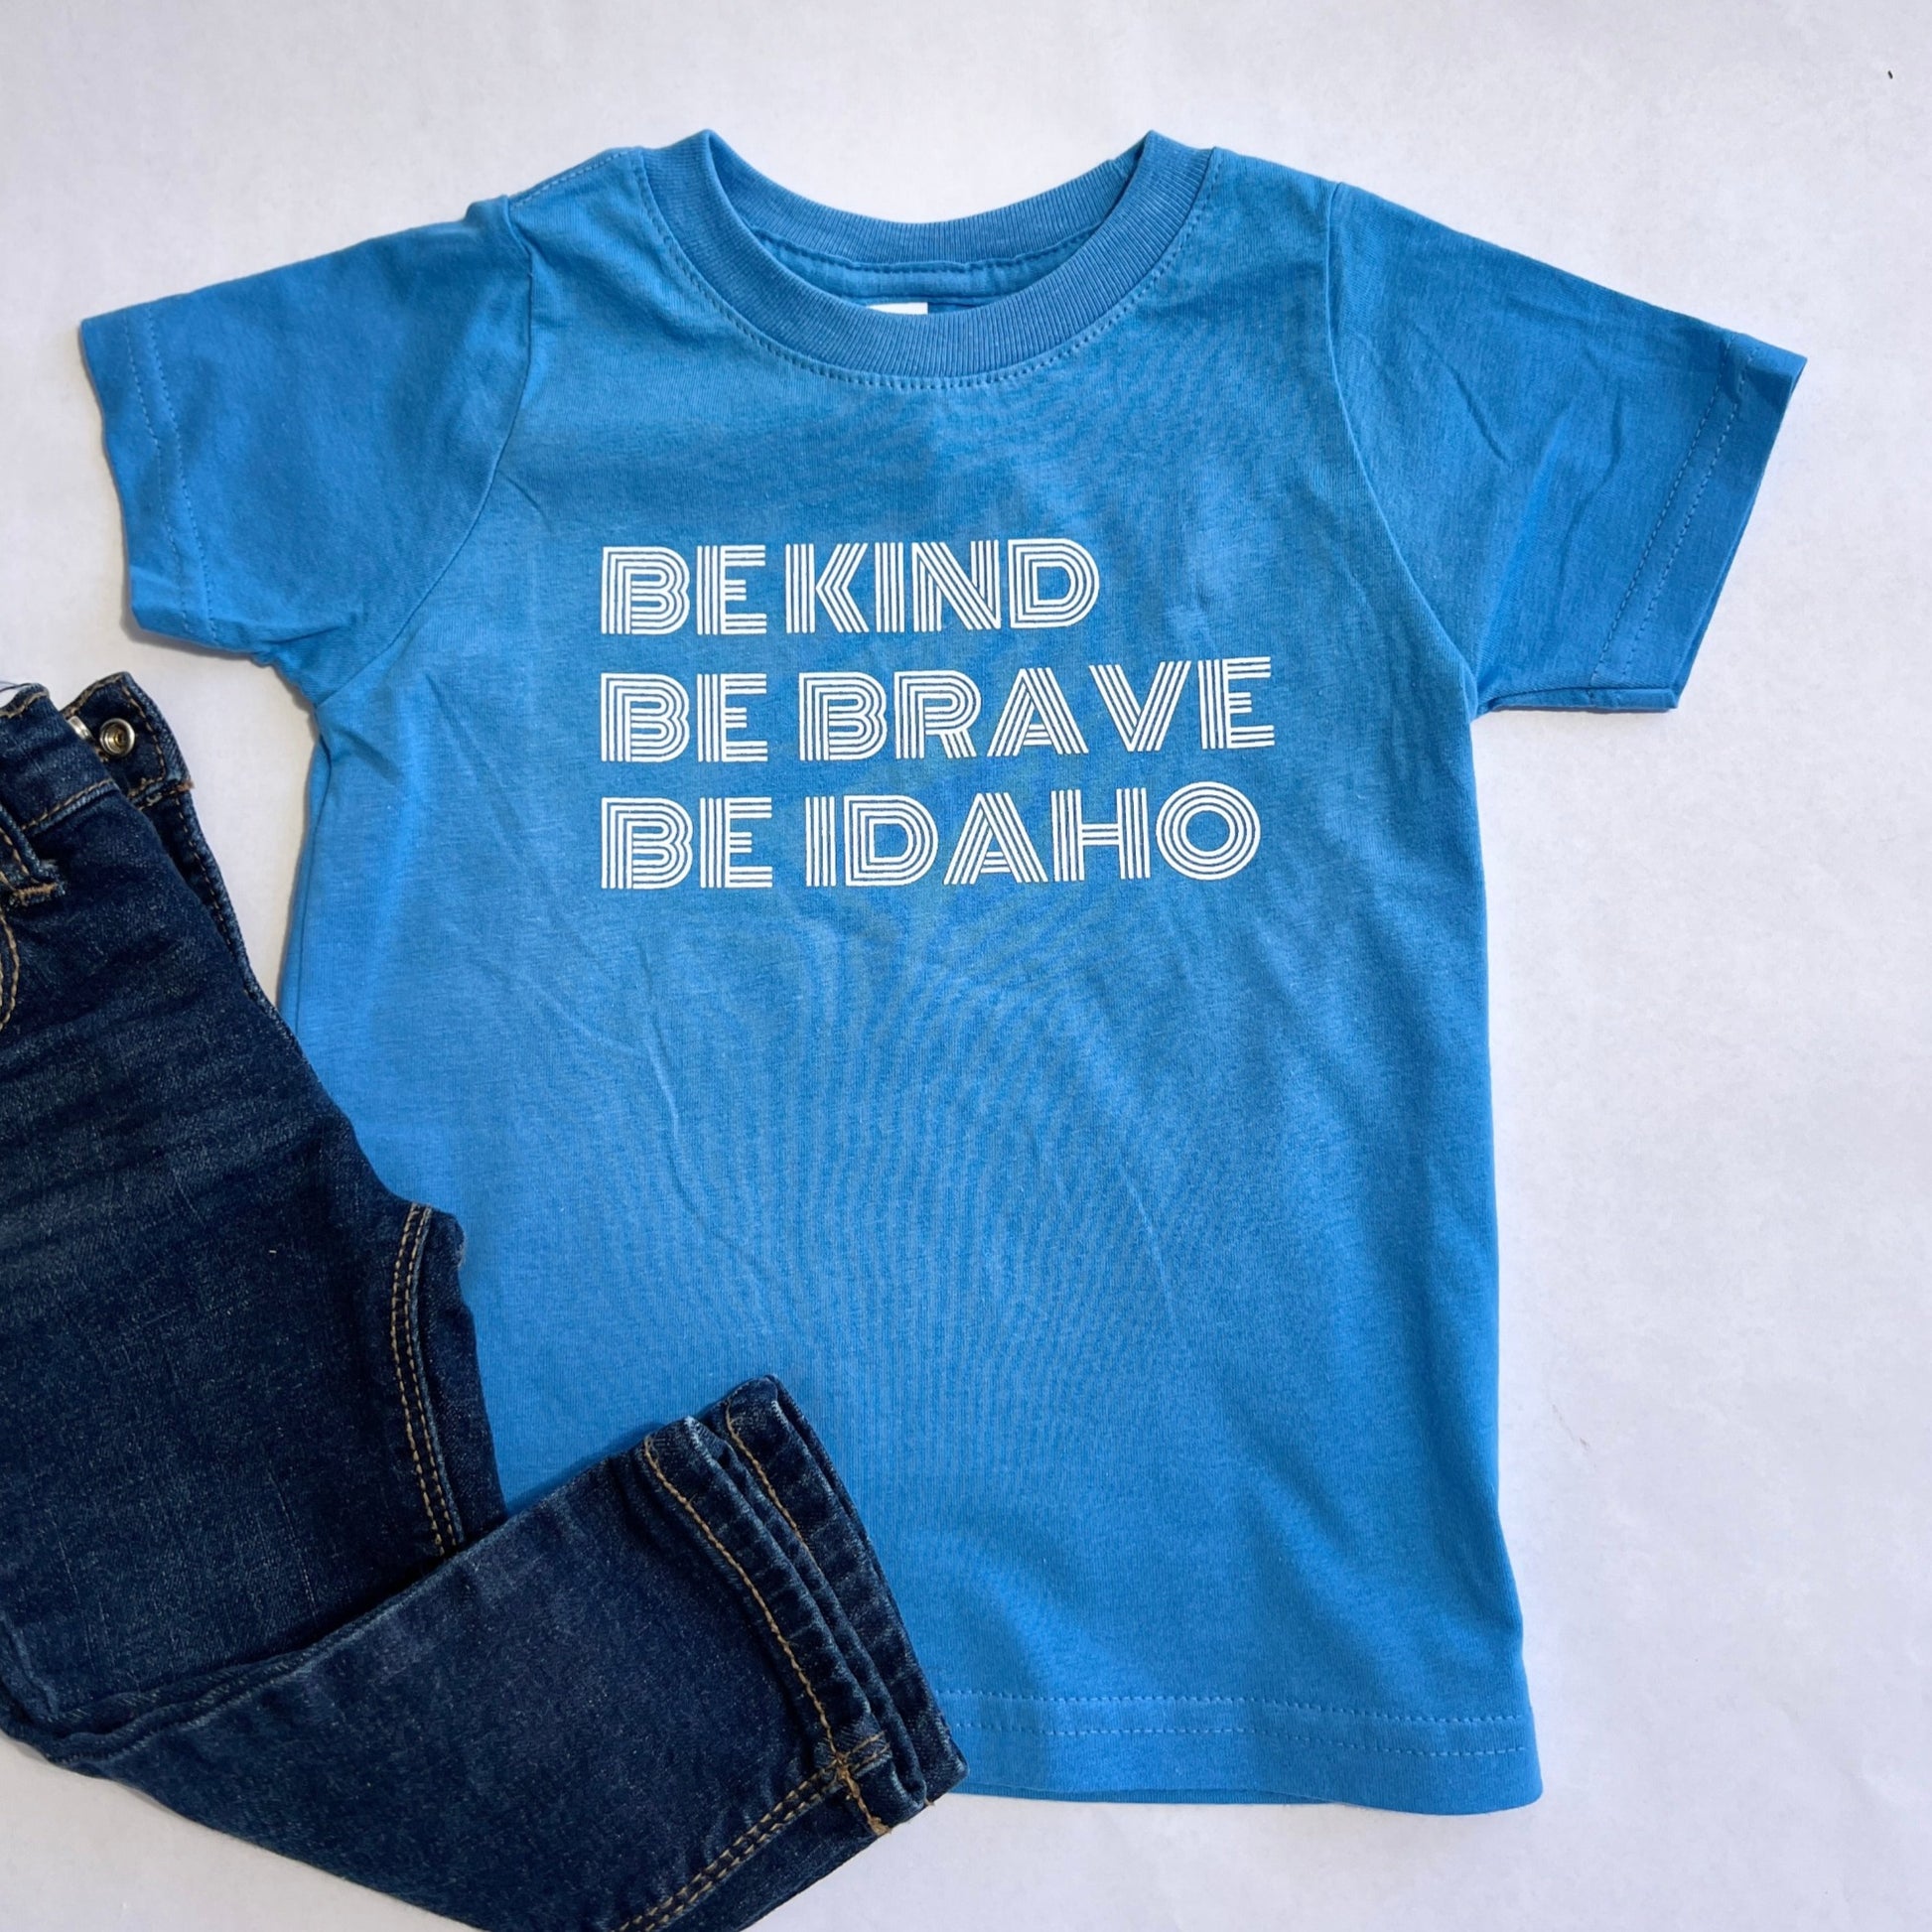 This Idaho T shirt is designed in Idaho. The T Shirt says Be Kind, Be Brave,Be Idaho. This shirt is showcasing the love Idaho has for everyone. All TatorJo apparel is made right here in Idaho.